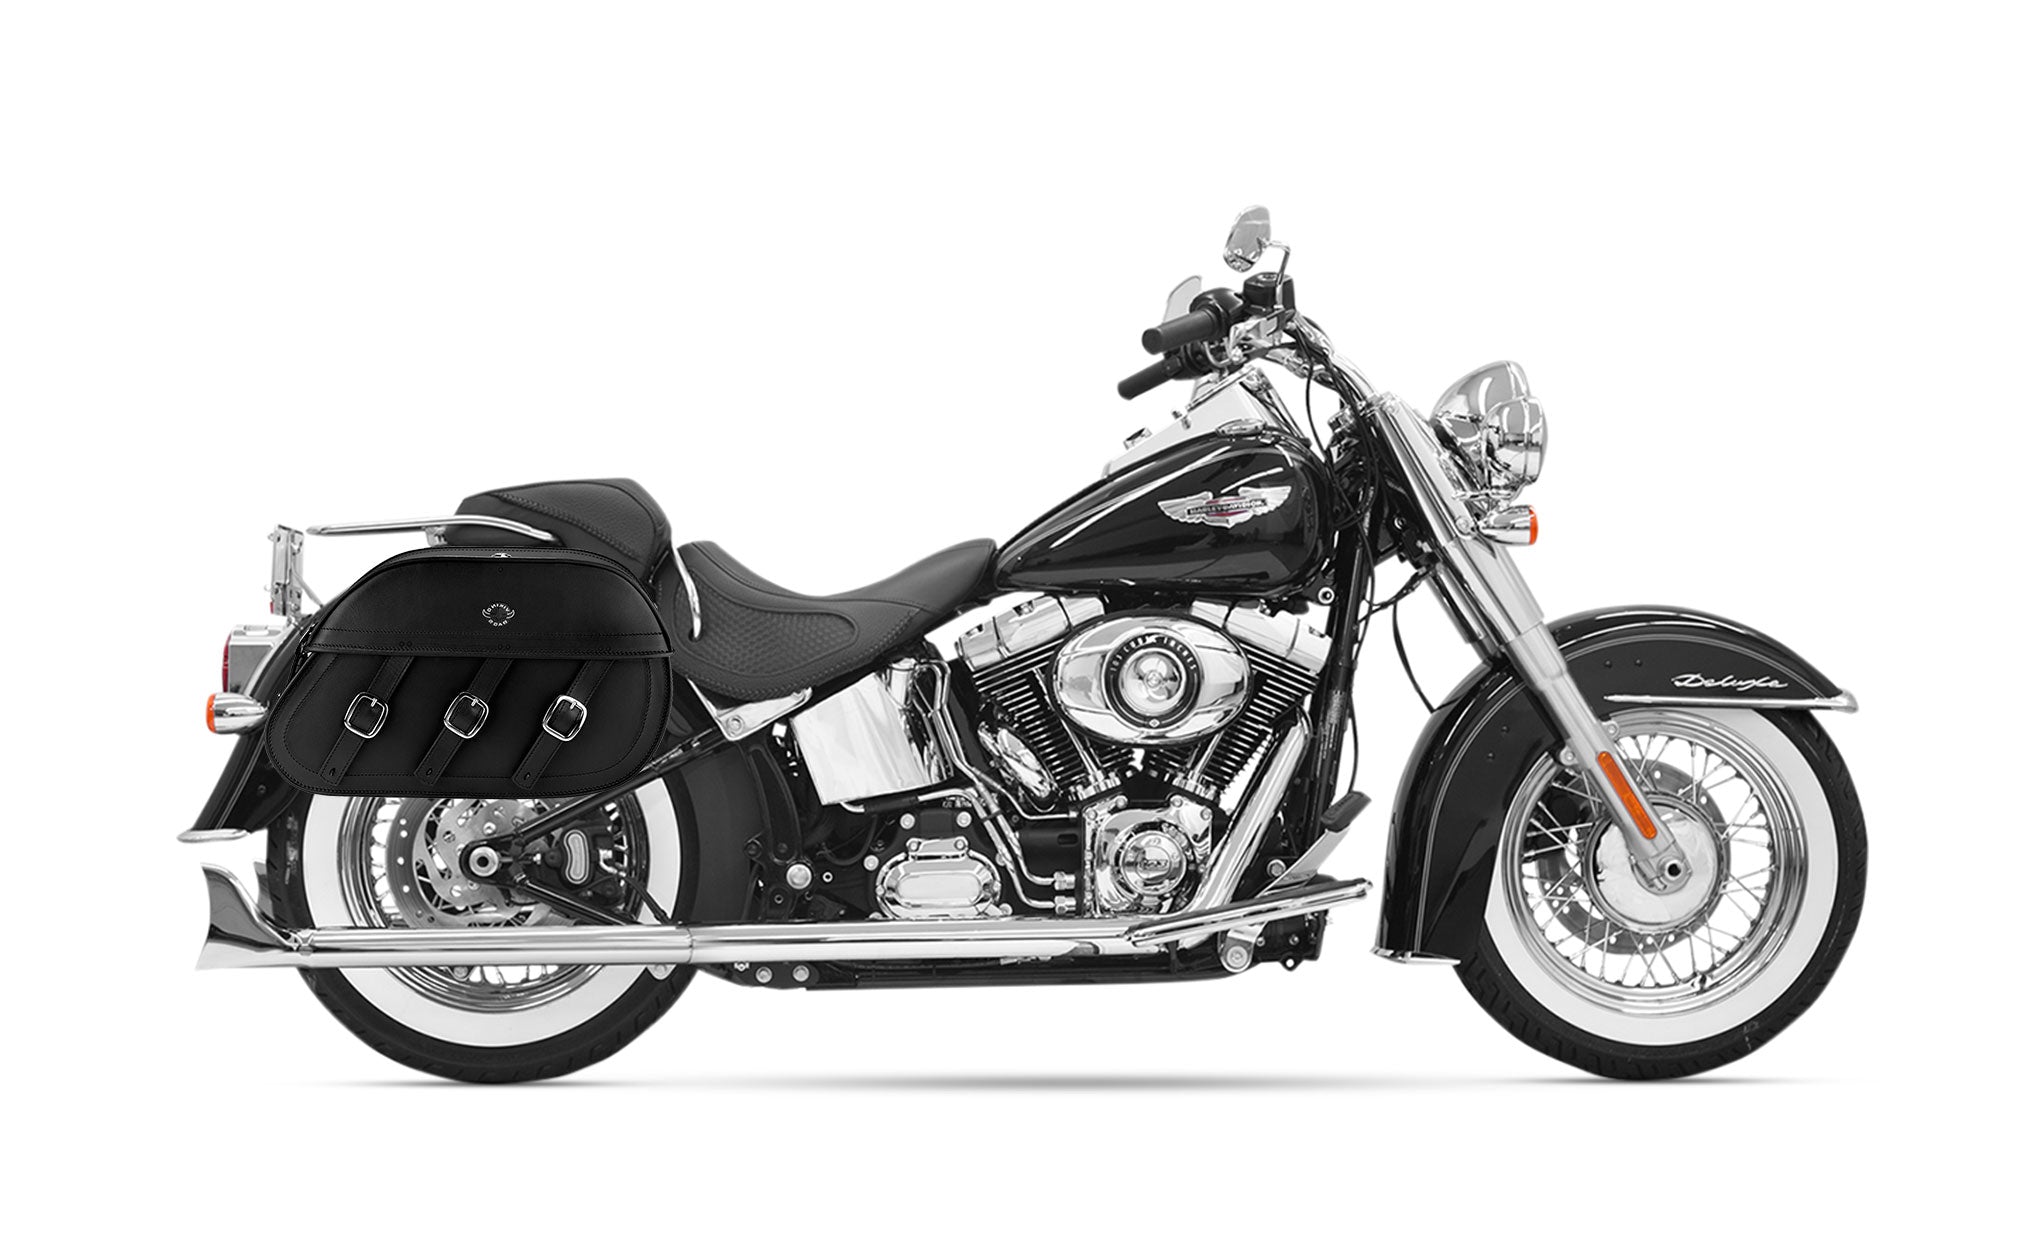 34L - Trianon Extra Large Leather Motorcycle Saddlebags for Harley Softail Heritage FLSTICCI on Bike Photo @expand